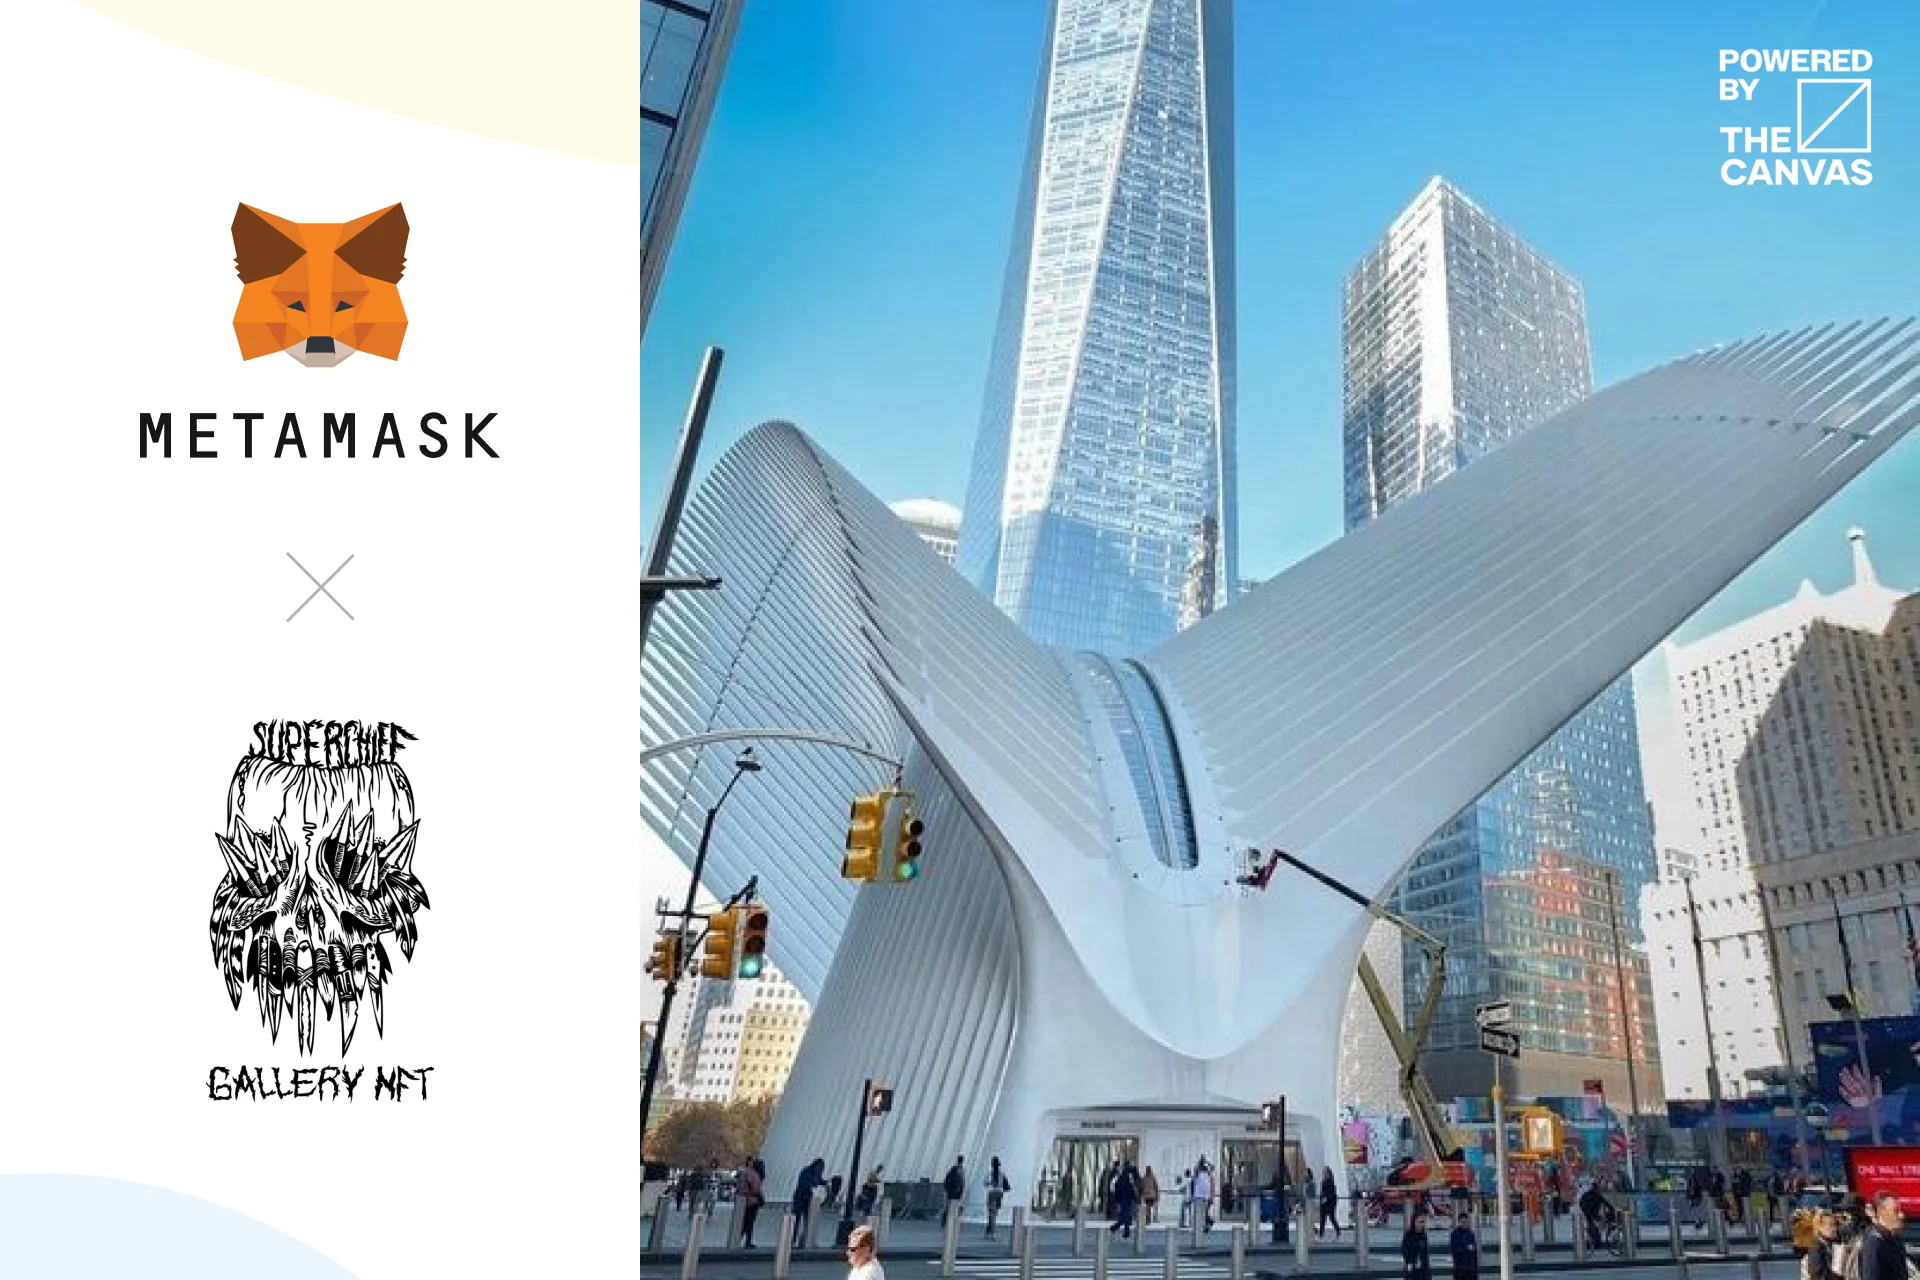 Image: Superchief Gallery NFT & MetaMask Present IRL Web3 Education at The Oculus at Westfield World Trade Center